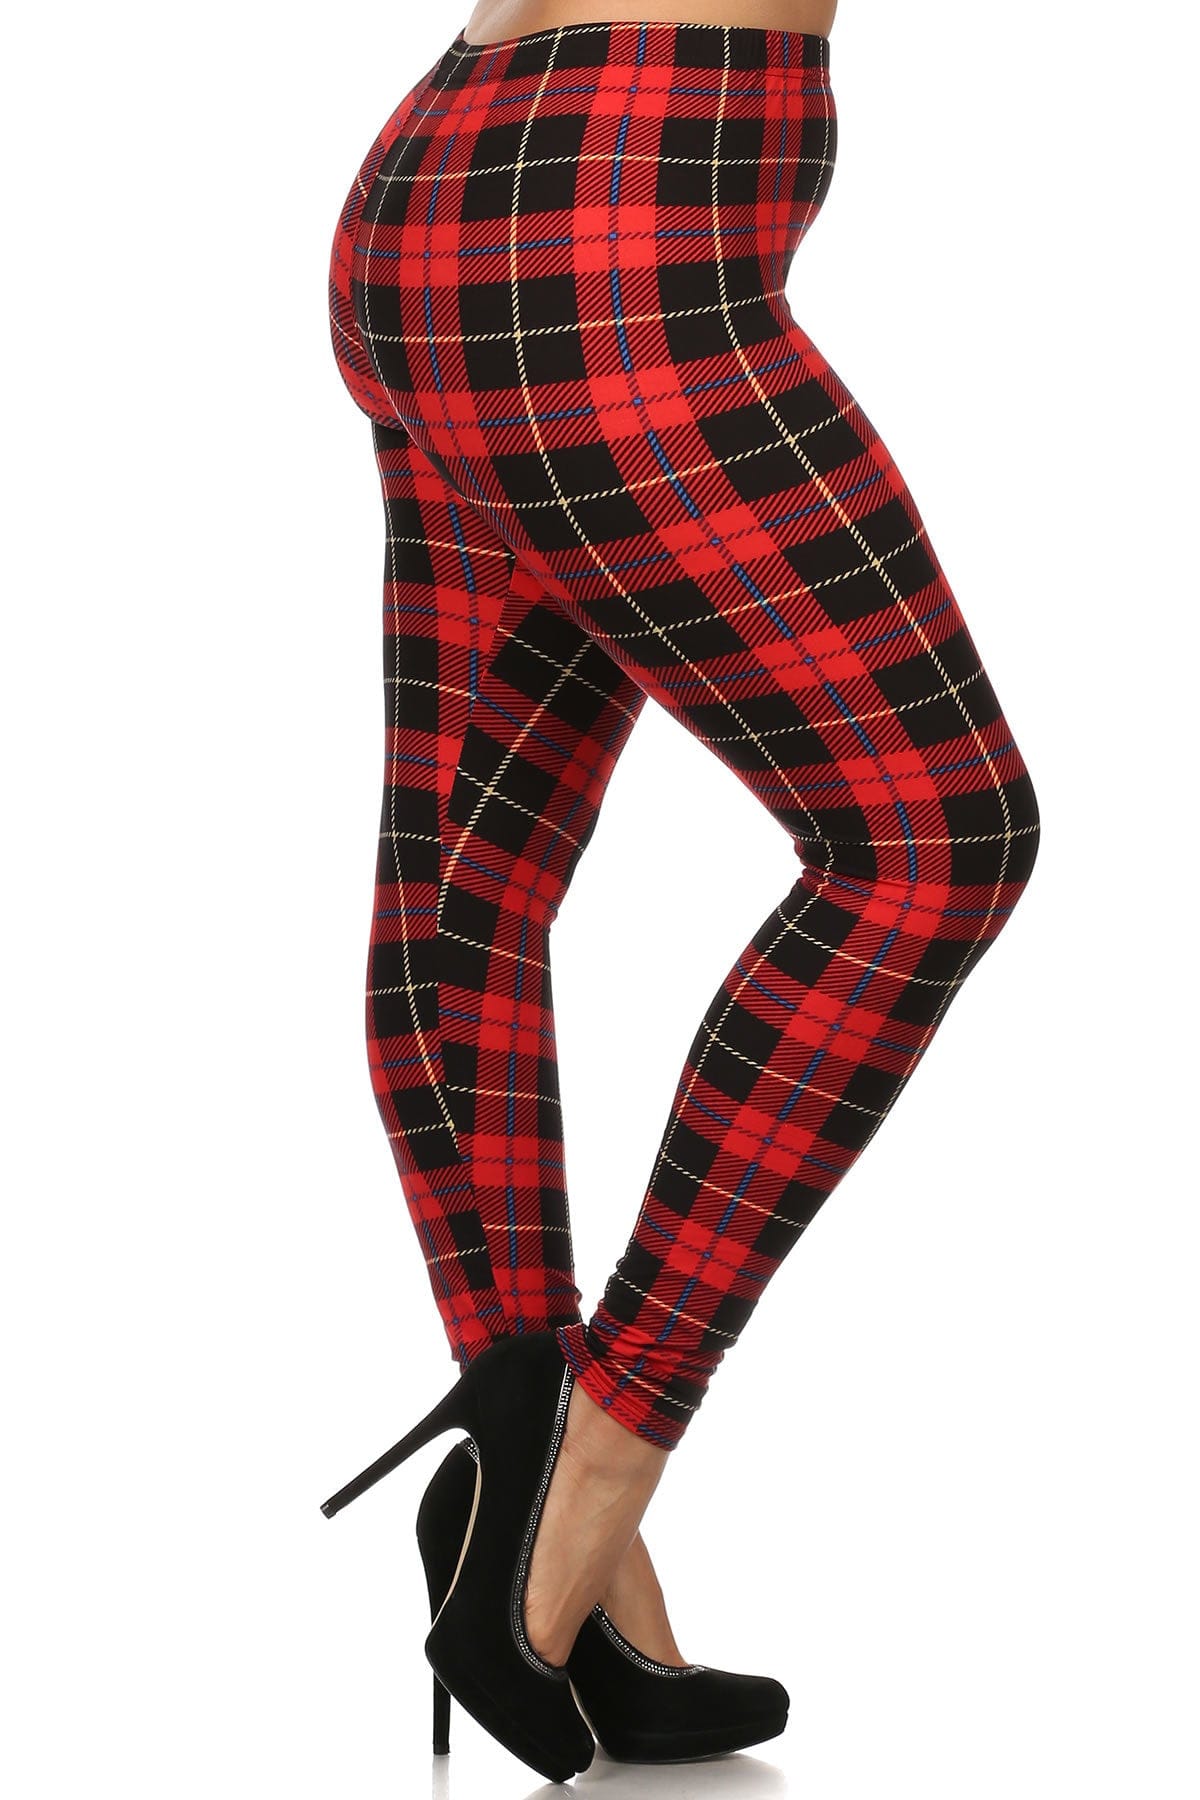 Plus Size Plaid & Checkered Print, Full Length Leggings In A Fitted Style - Body By J'ne